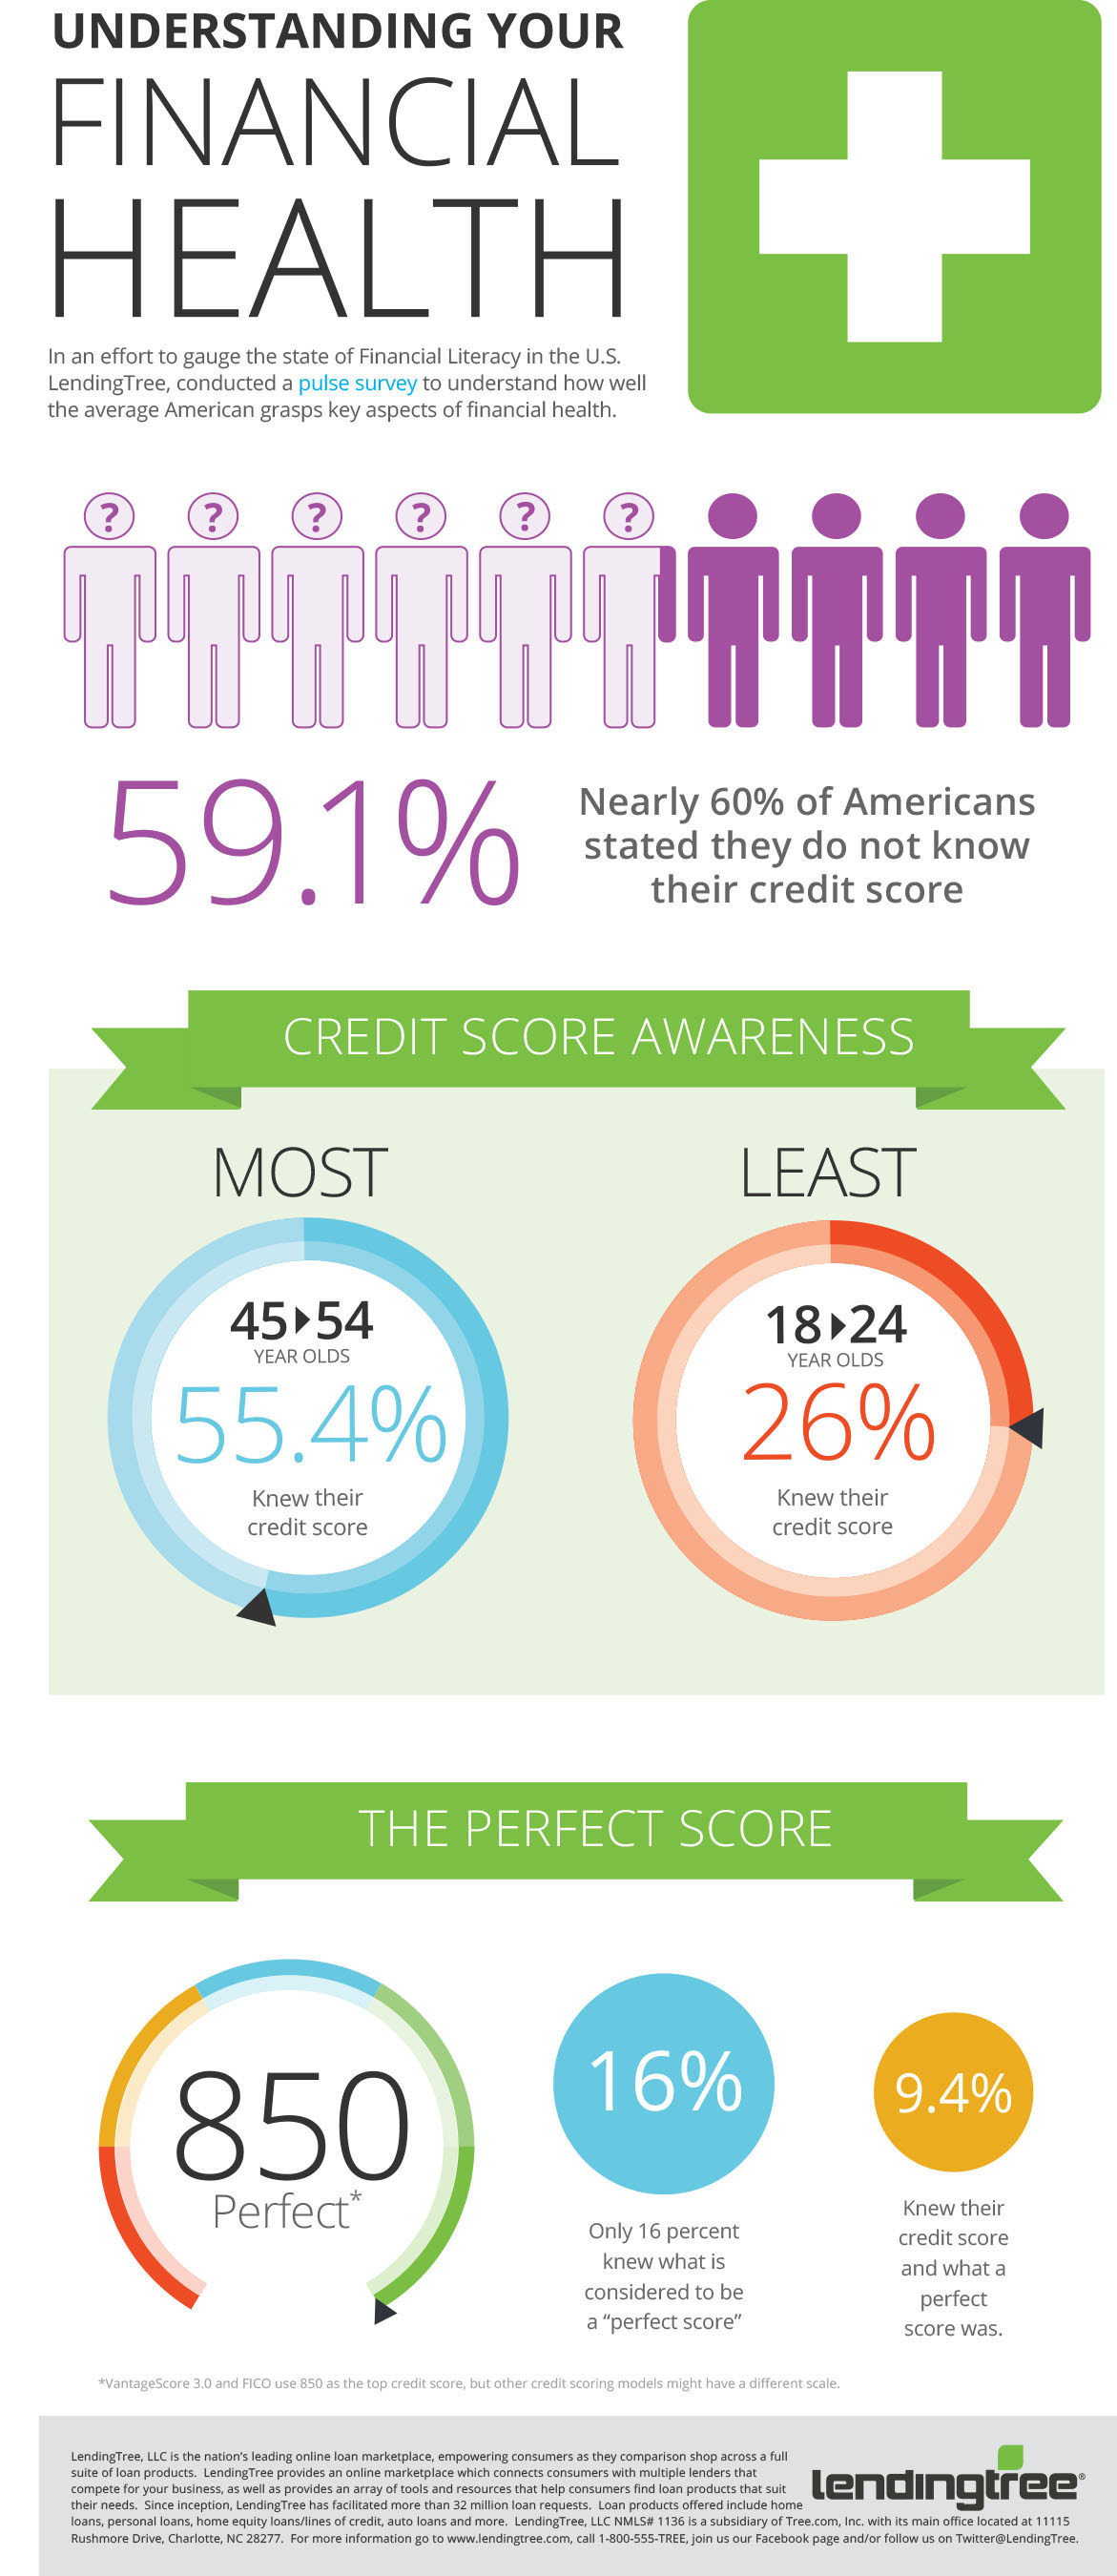 LendingTree Survey Finds Nearly 60% of Americans Don't Know Their Credit Scores; Most consumers lack critical credit health awareness